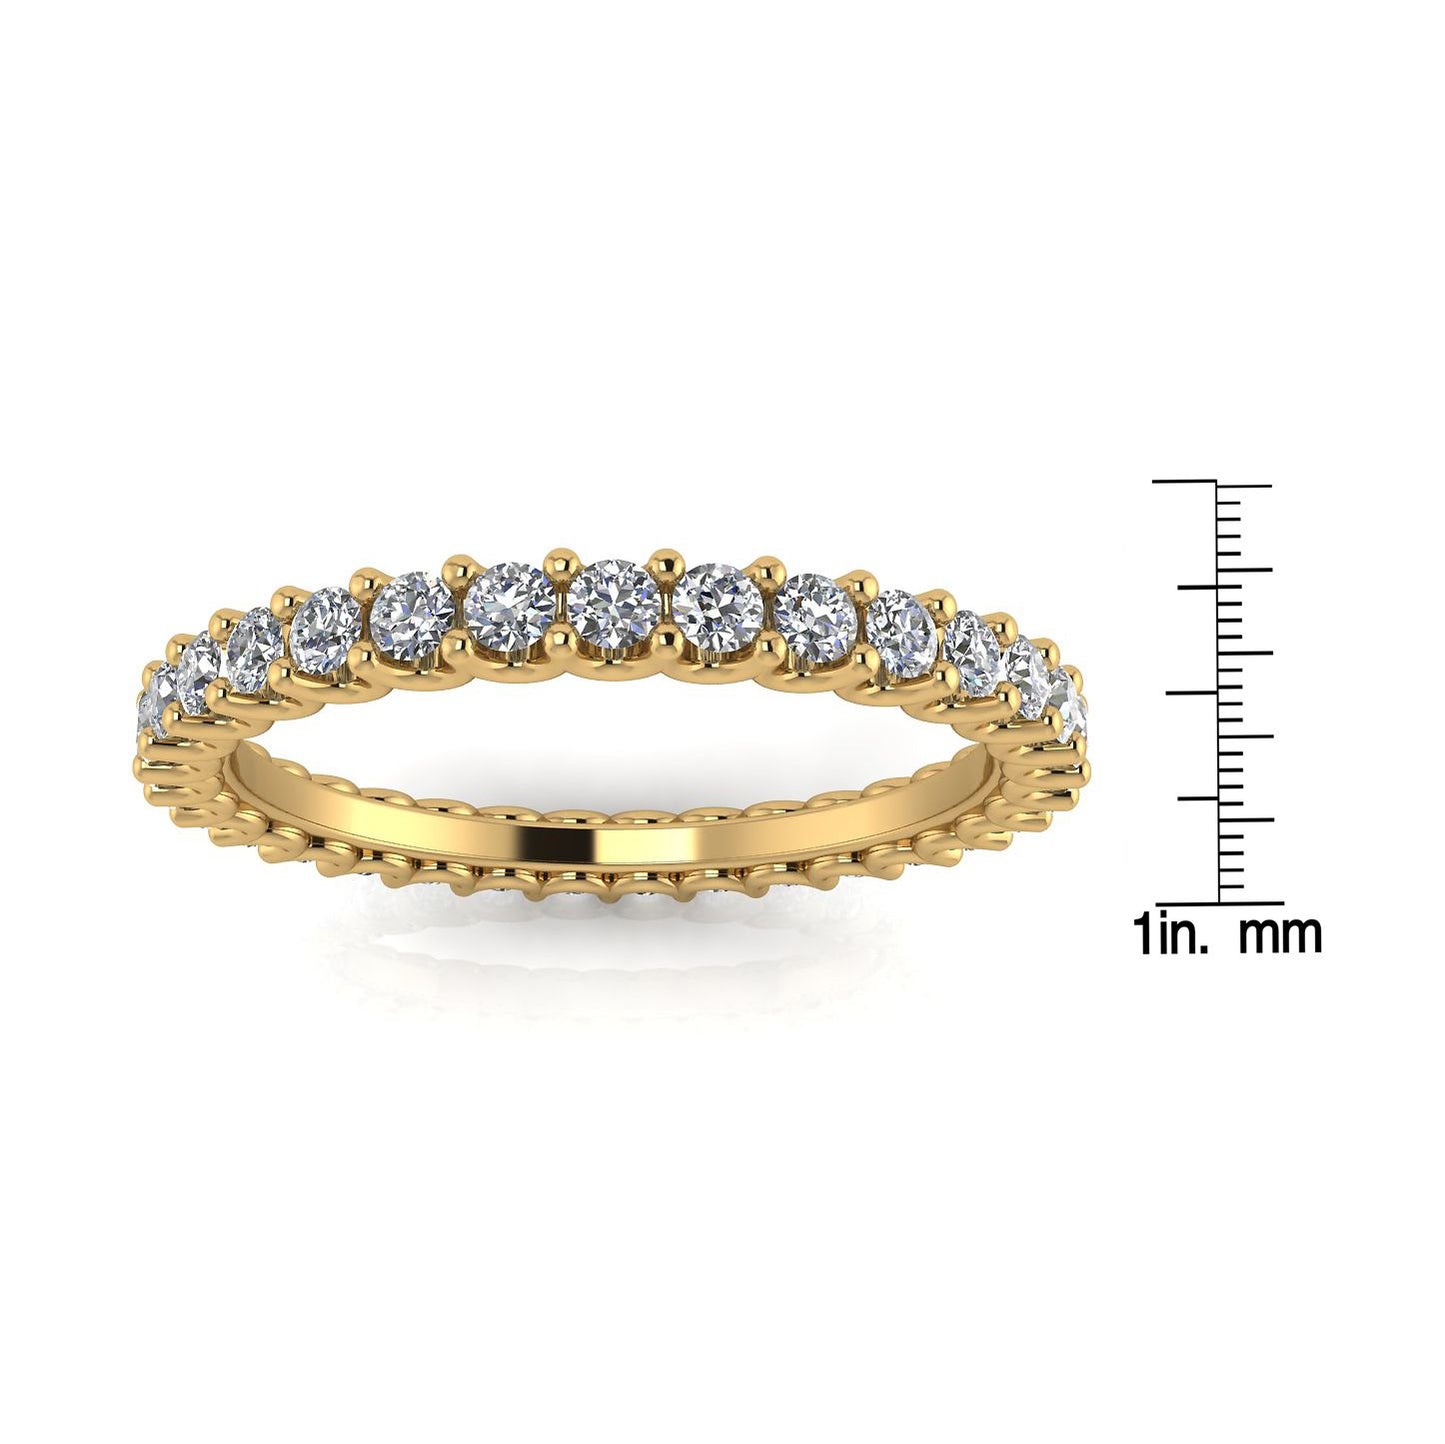 Round Brilliant Cut Diamond Shared Prong Set Eternity Ring In 14k Yellow Gold  (0.7ct. Tw.) Ring Size 6.5